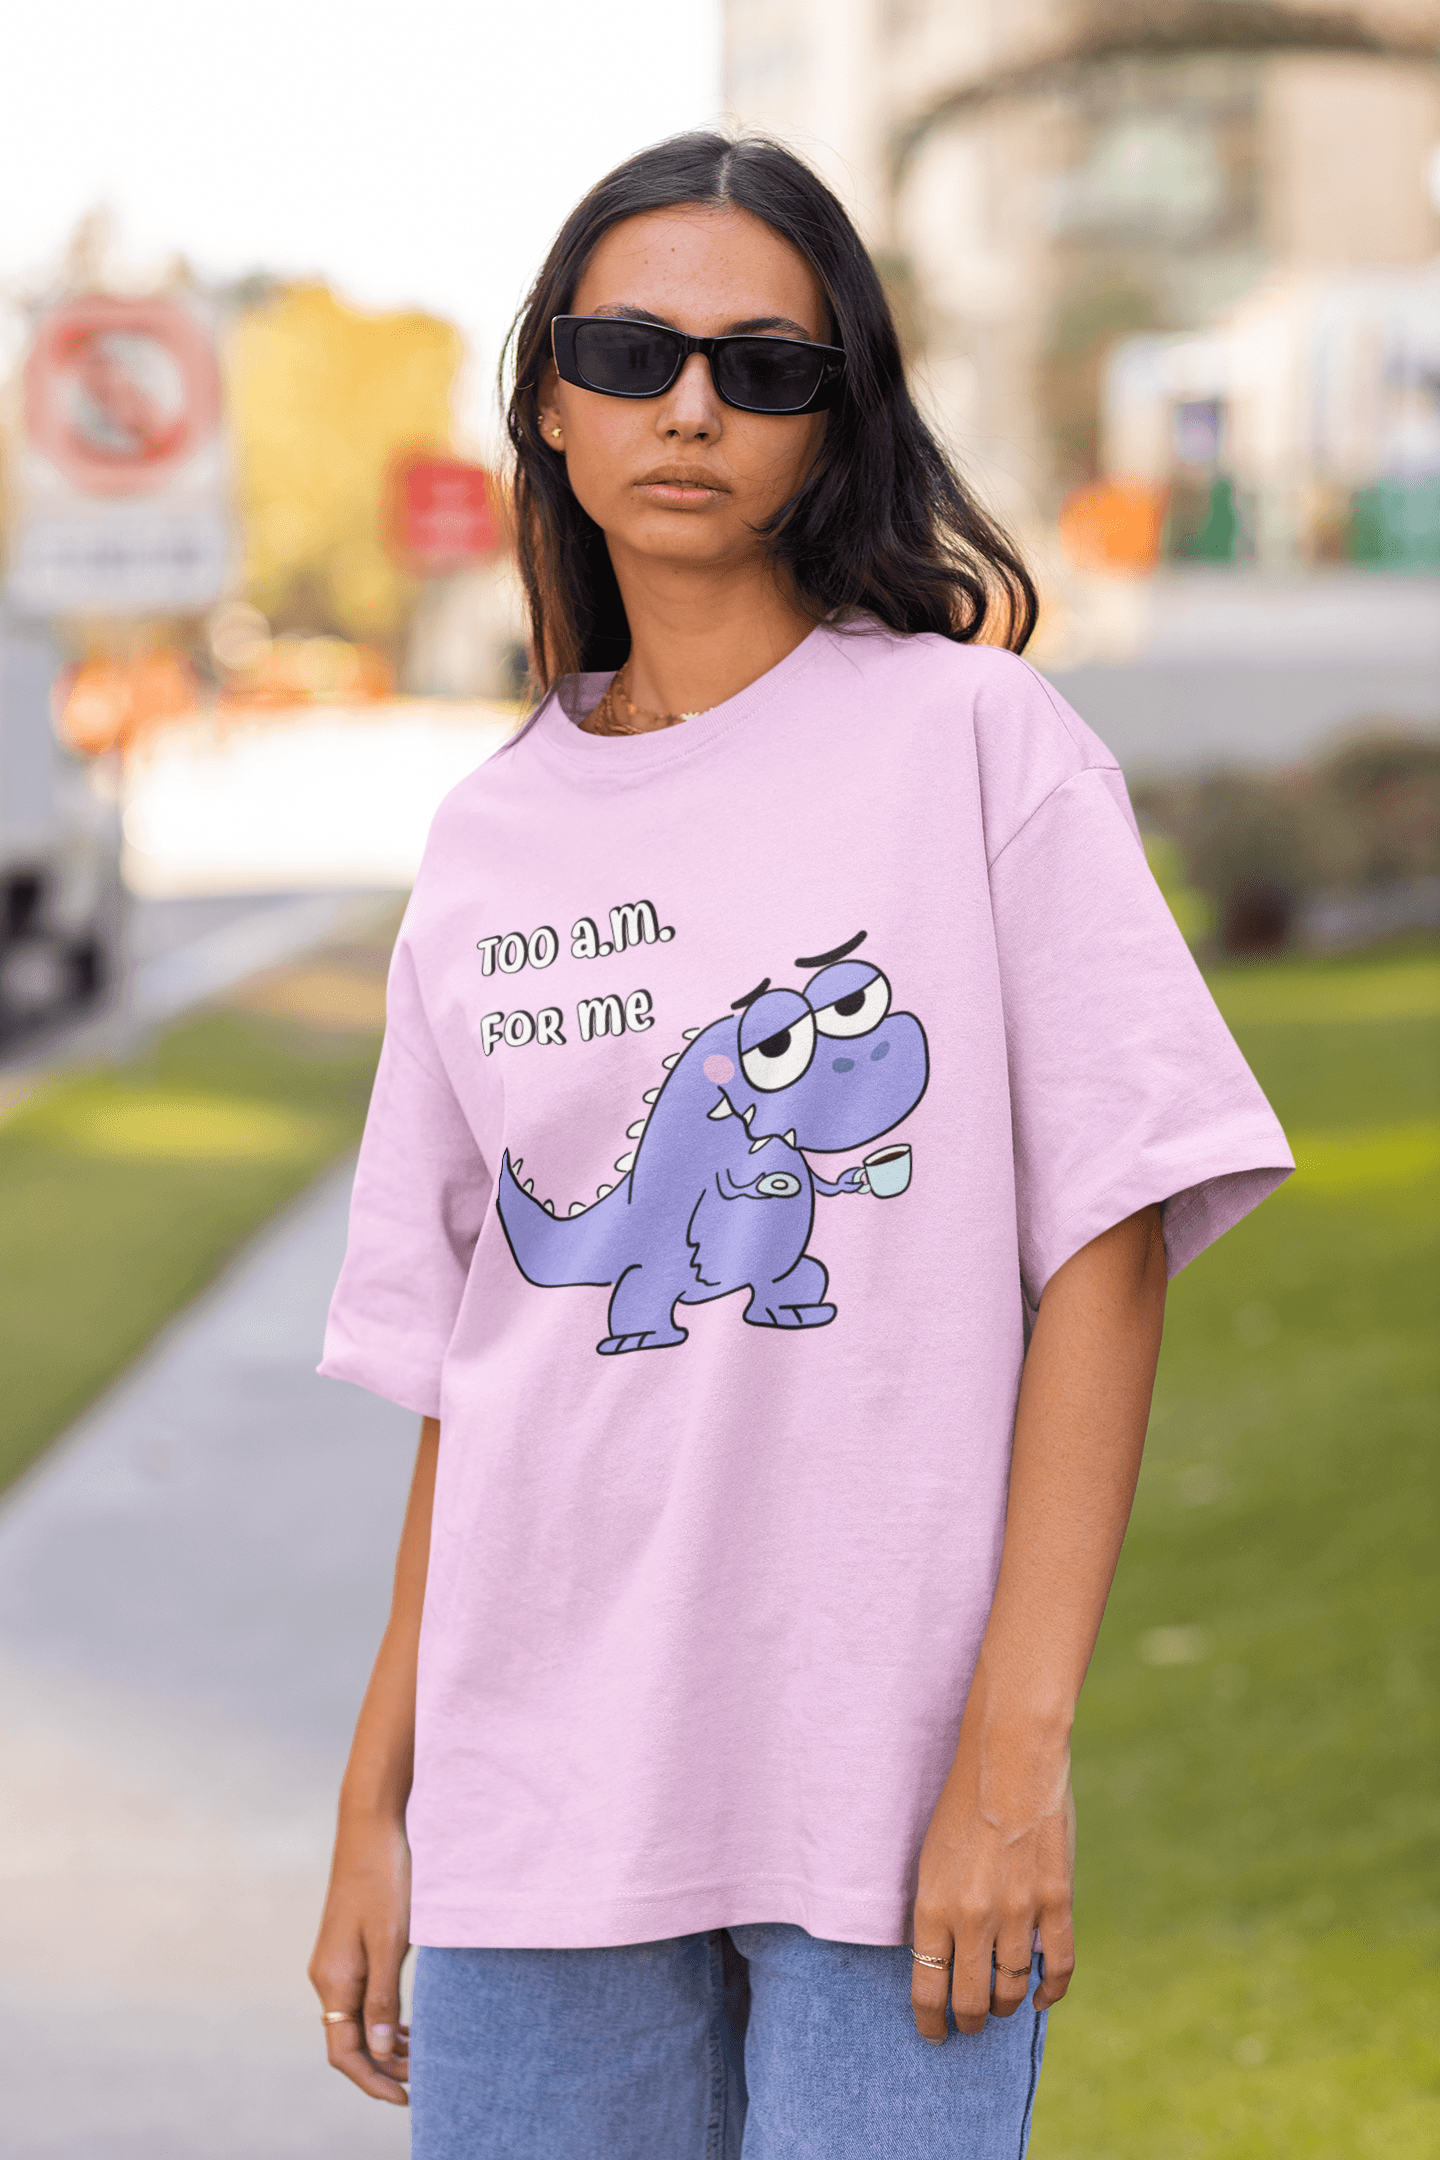 Too A.M. For Me- T-Rex Oversized T-shirts - Unisex - Cute Stuff India